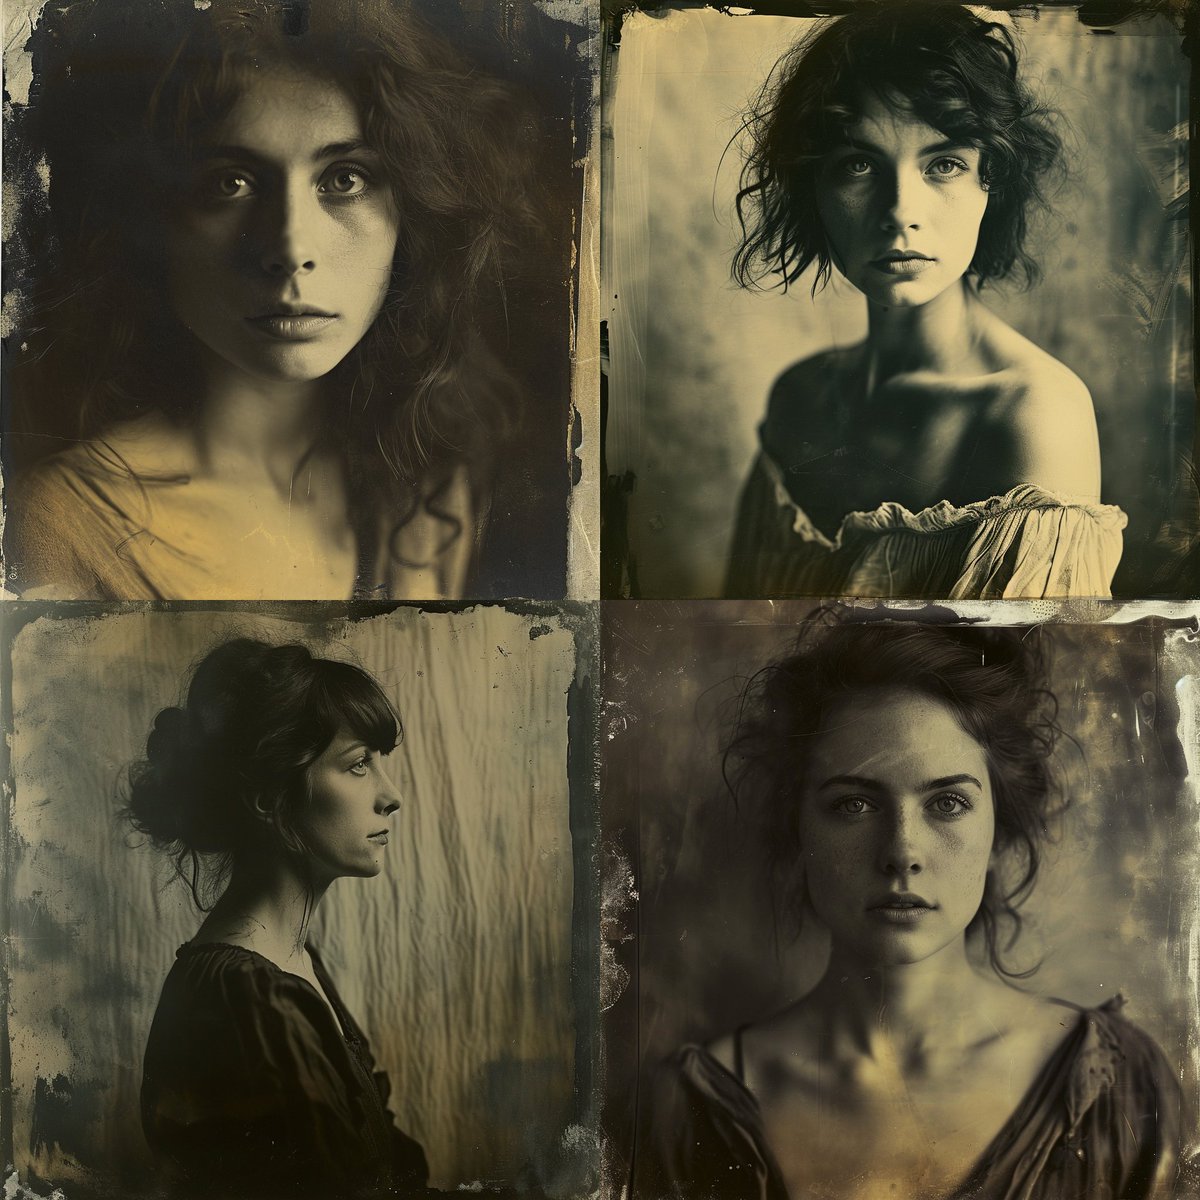 V6 pictorialism a portrait
@altfortomorrow 

Think I like this best of all 3